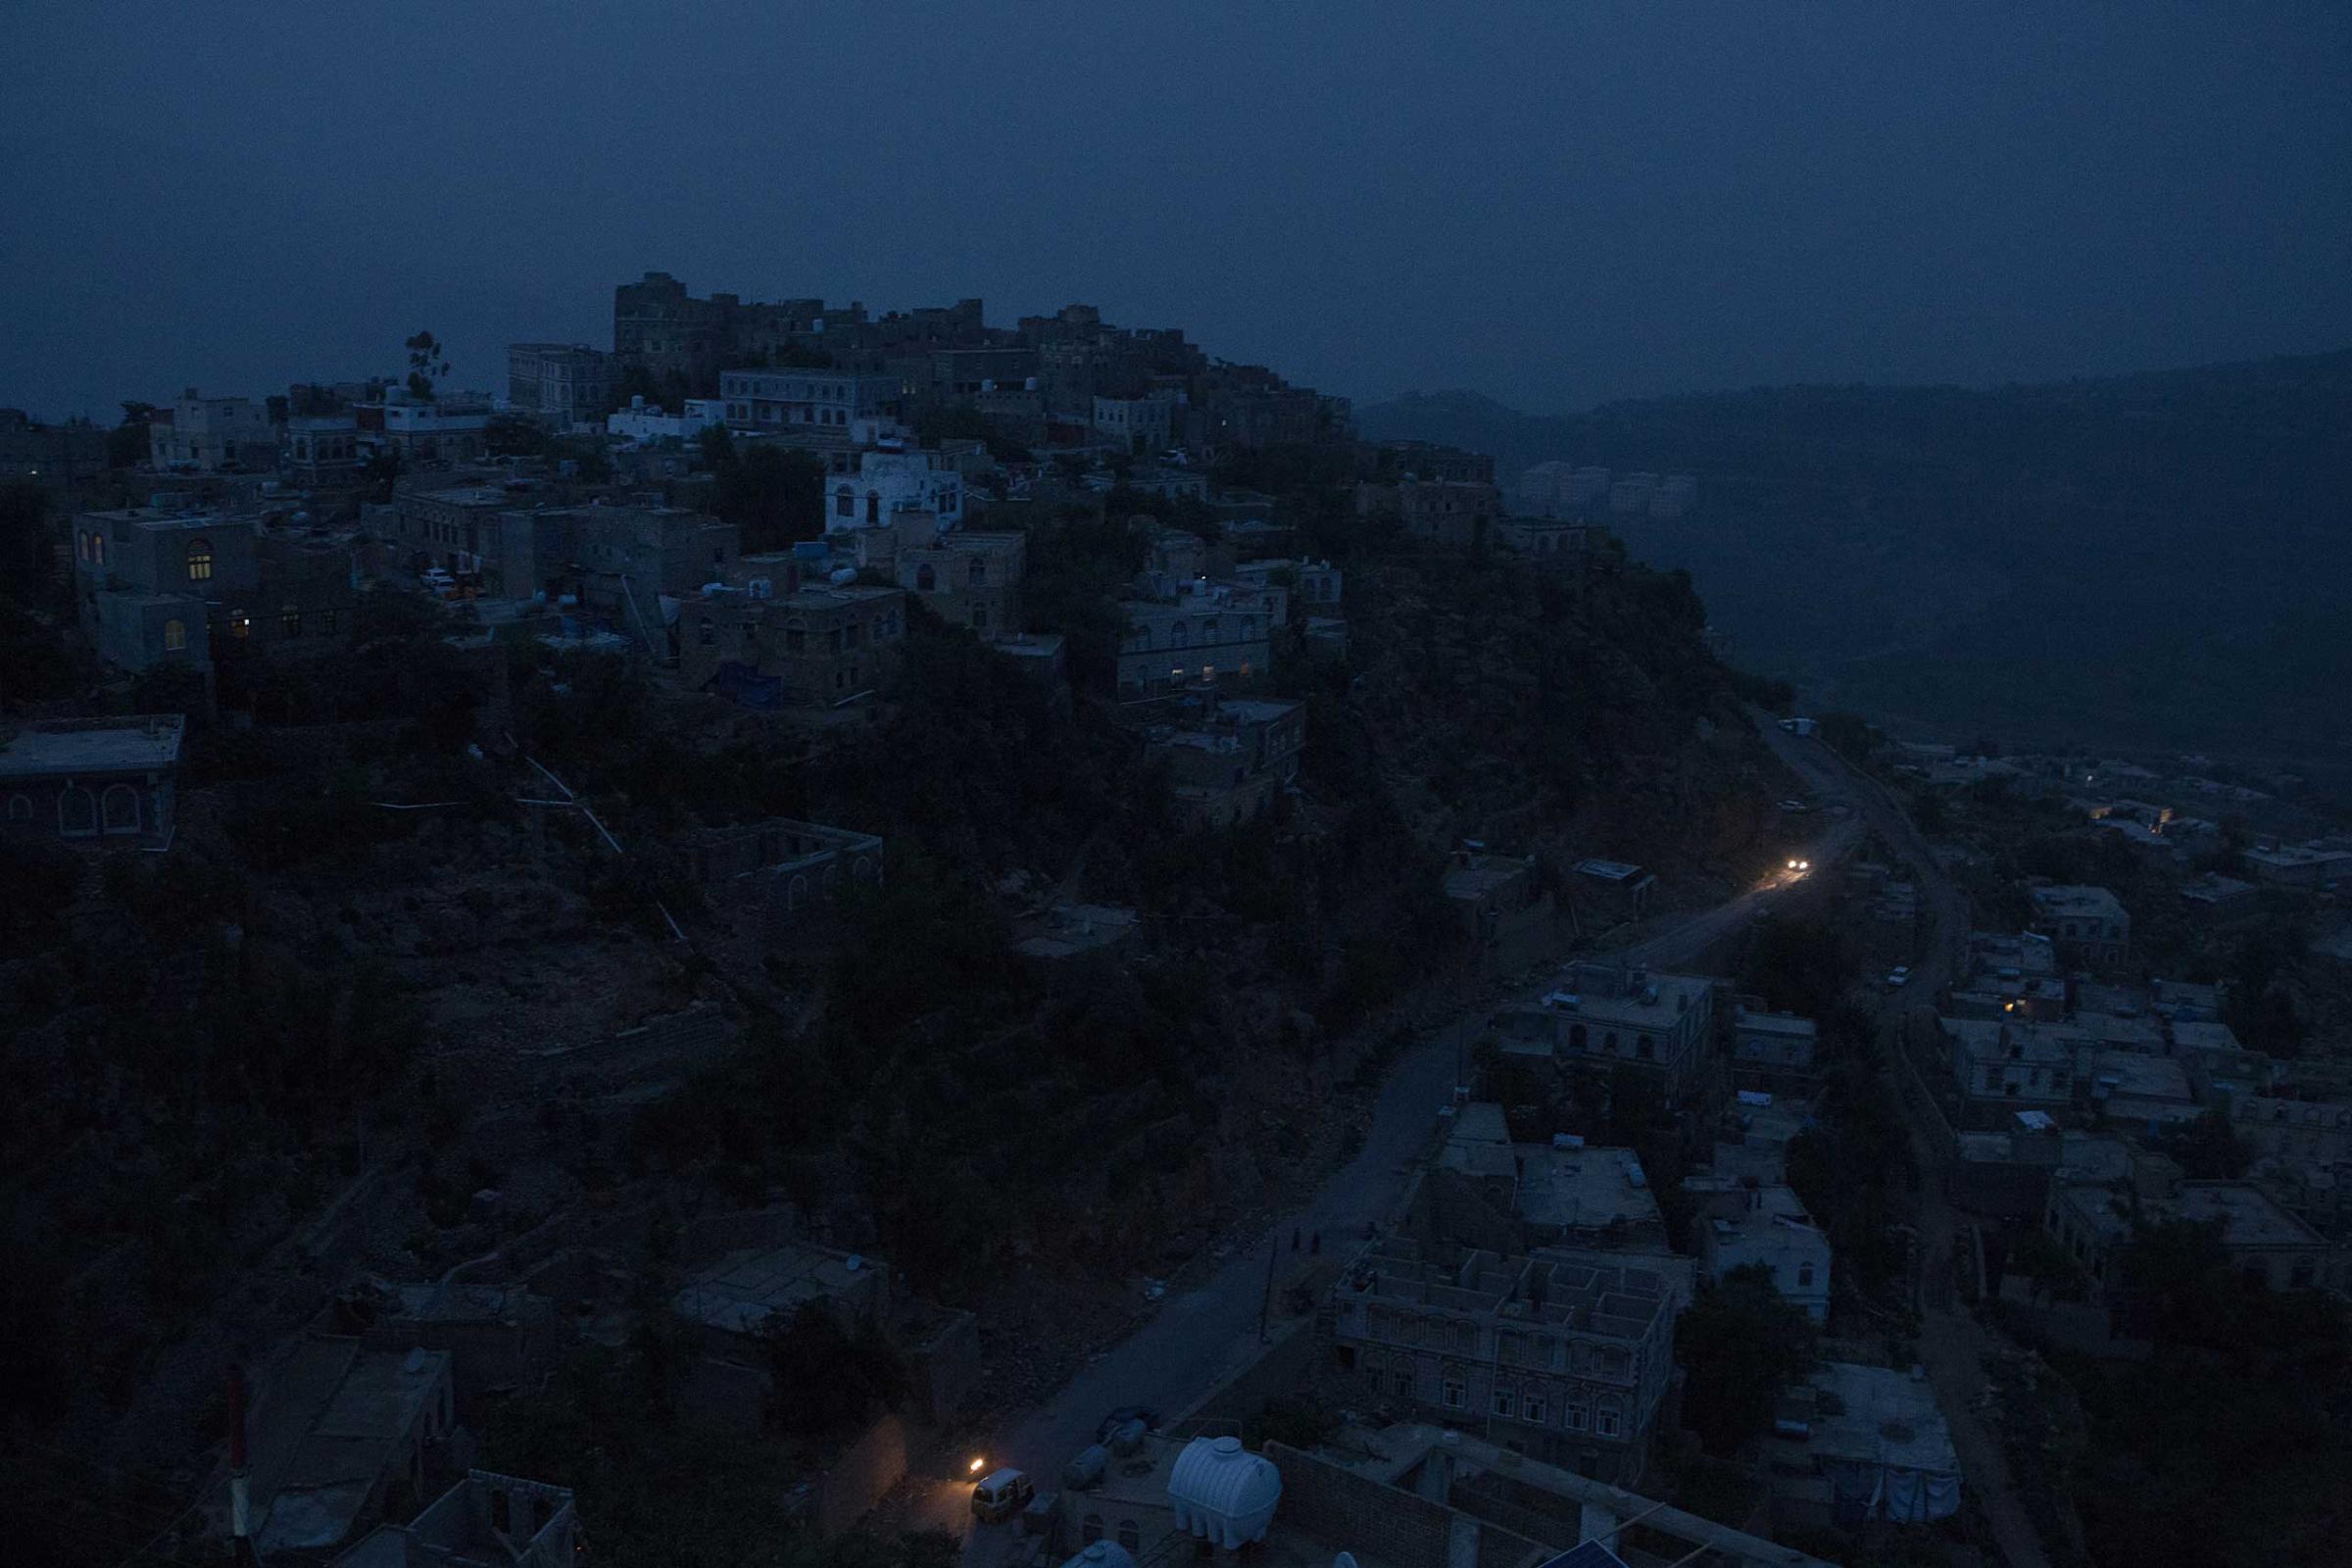 The evening view of the city of Hajjah. Northern provinces of Yemen stay without electricity. As the infrastructure was destroyed in the first days of war, the fuel generators and solar batteries became the only sources of electricity. With the fuel crisis deepening in the country, most of the civilians in the remote areas stay with no access to the electricity sources.